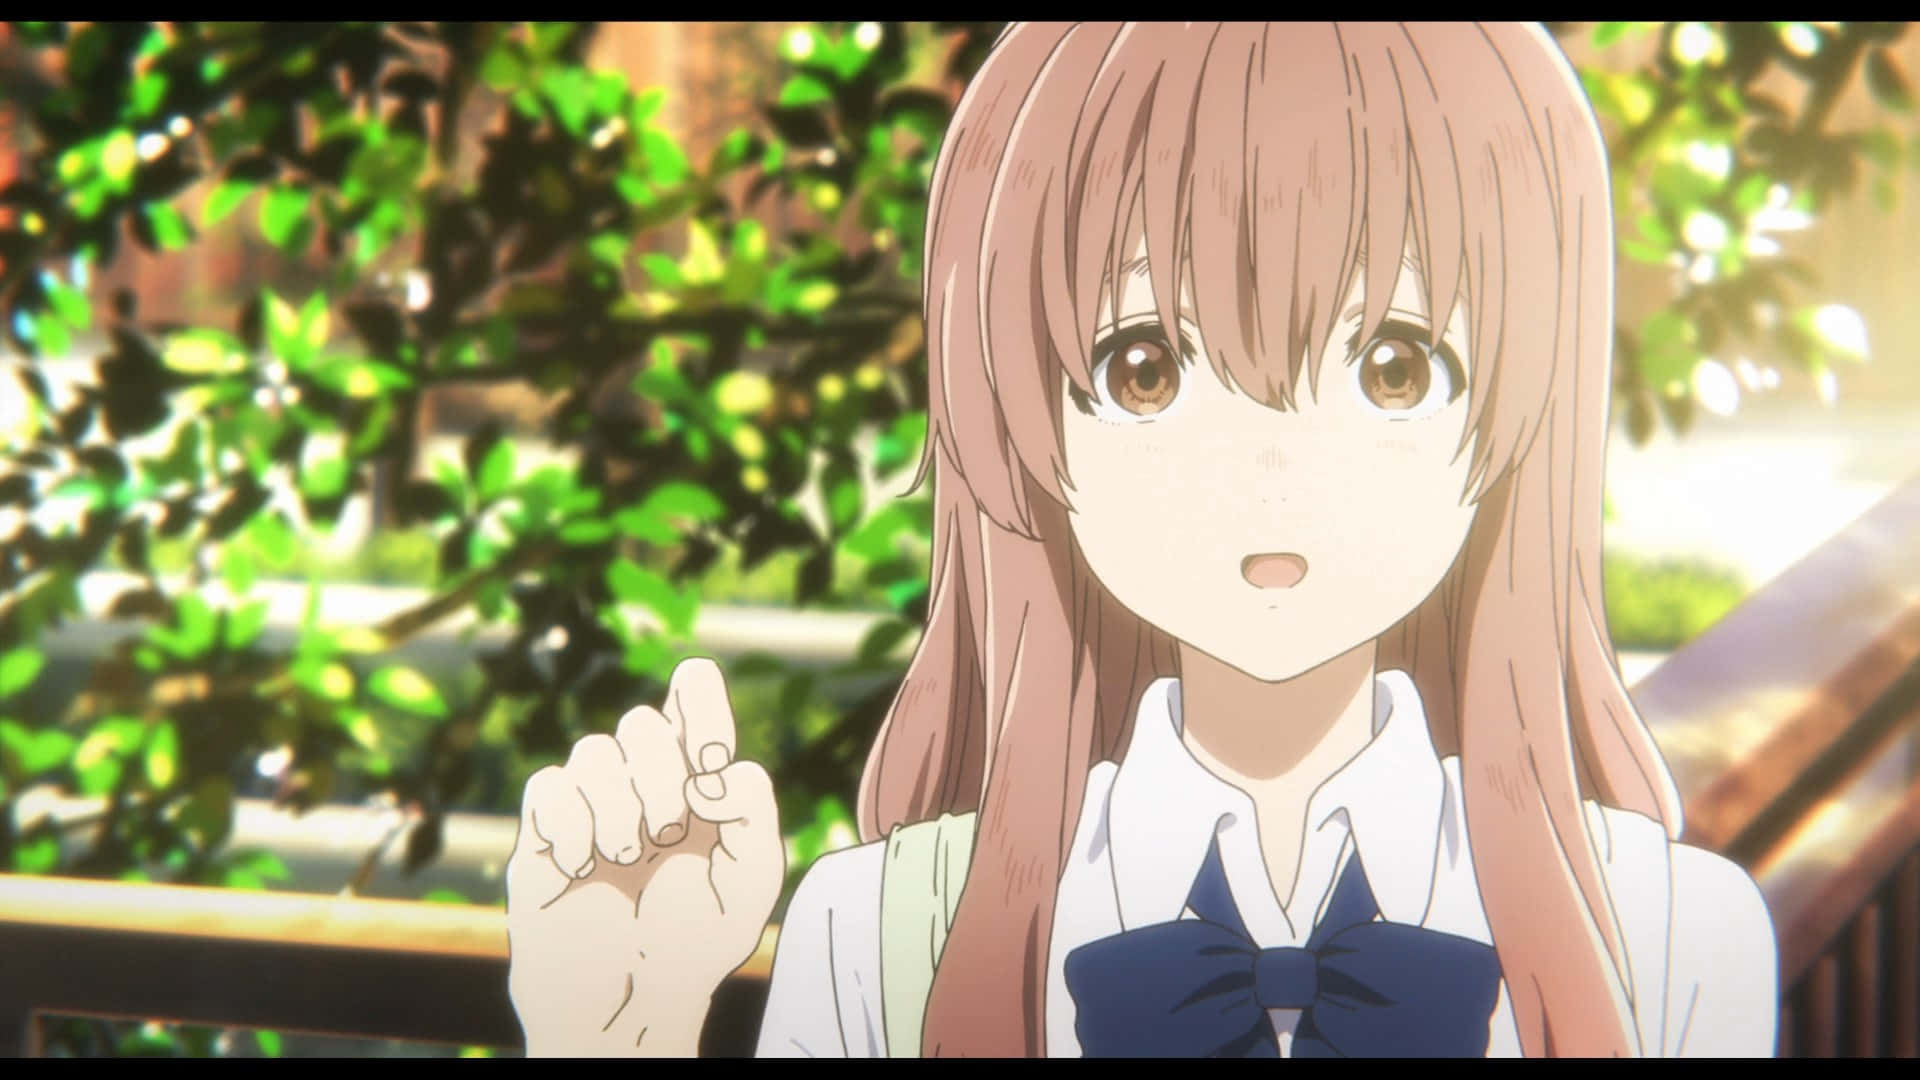 A Silent Voice: A Heartwarming Journey of Emotional Growth